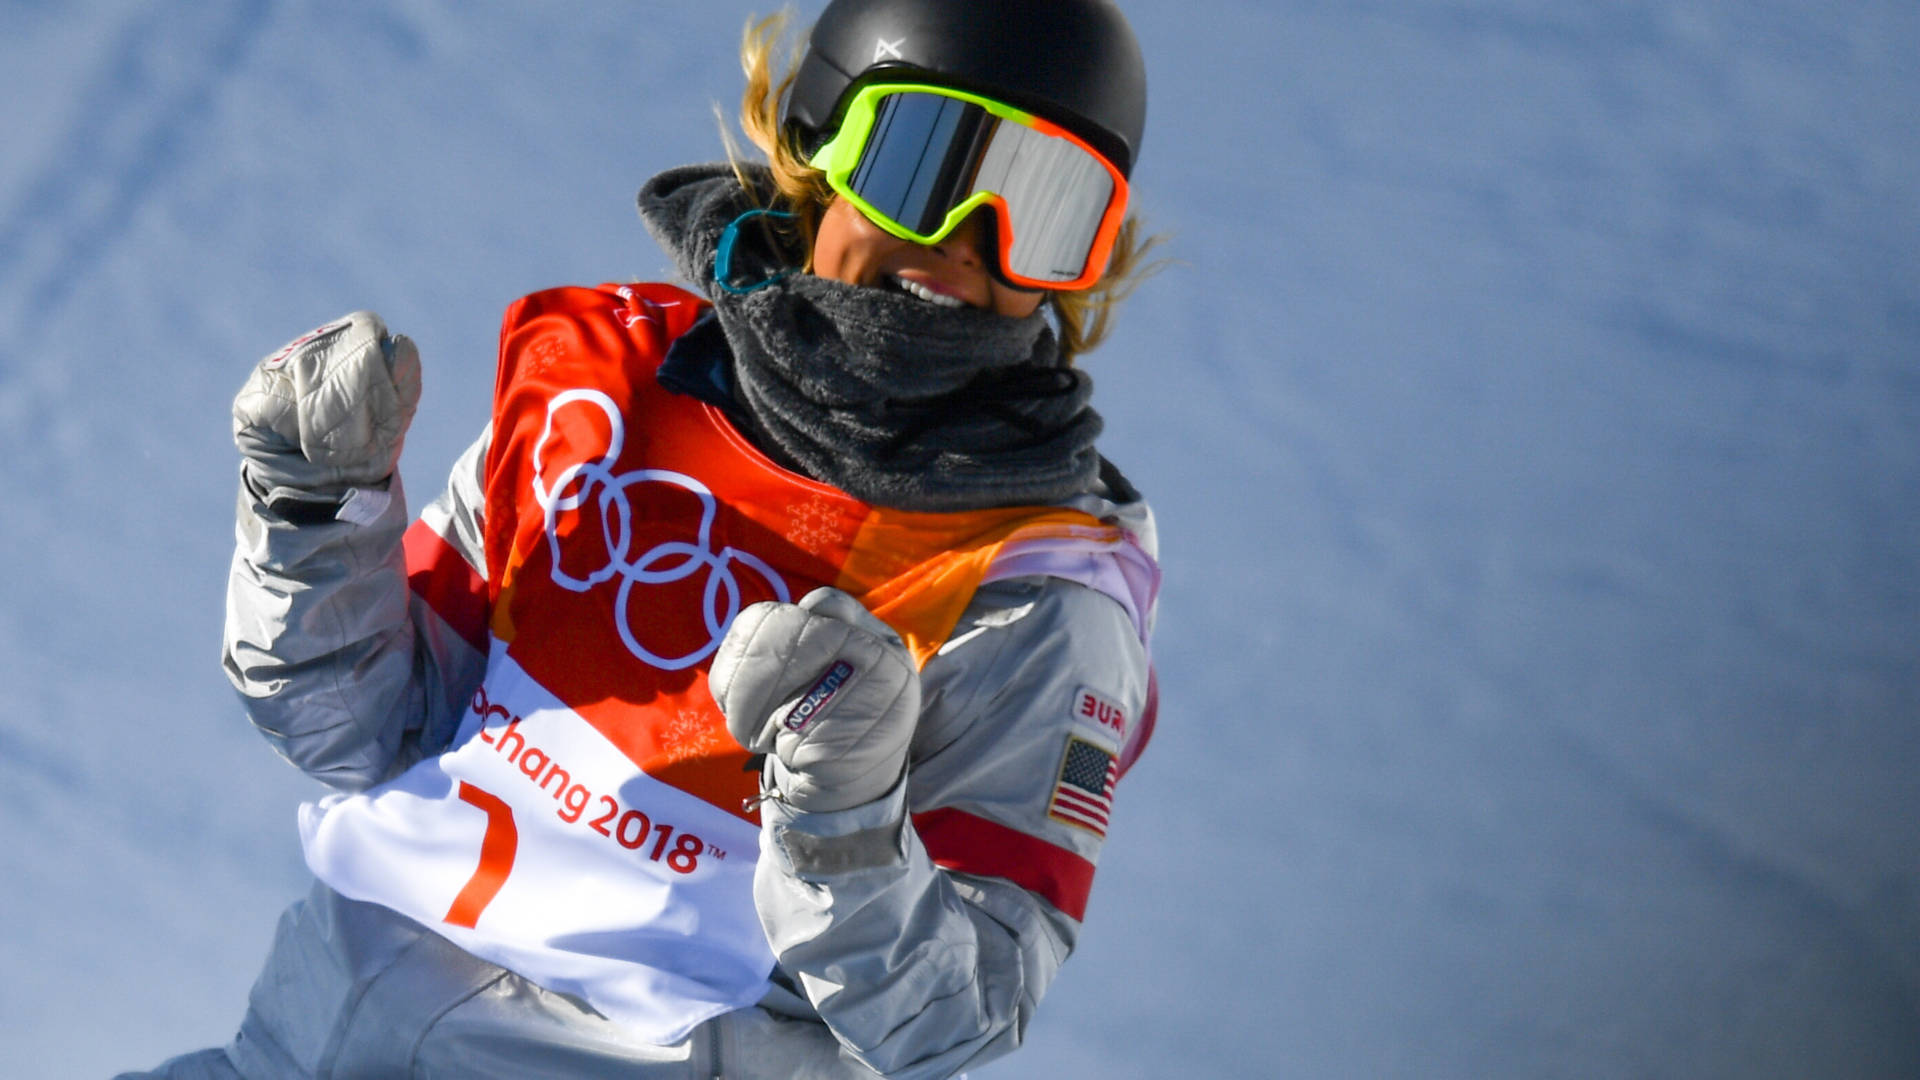 Chloe Kim won the gold medal in the snowboard women's halfpipe final at Phoenix Snow Park in the Winter Olympics in Pyeongchang, South Korea. Ramsey Cardy/Sportsfile via Getty Images